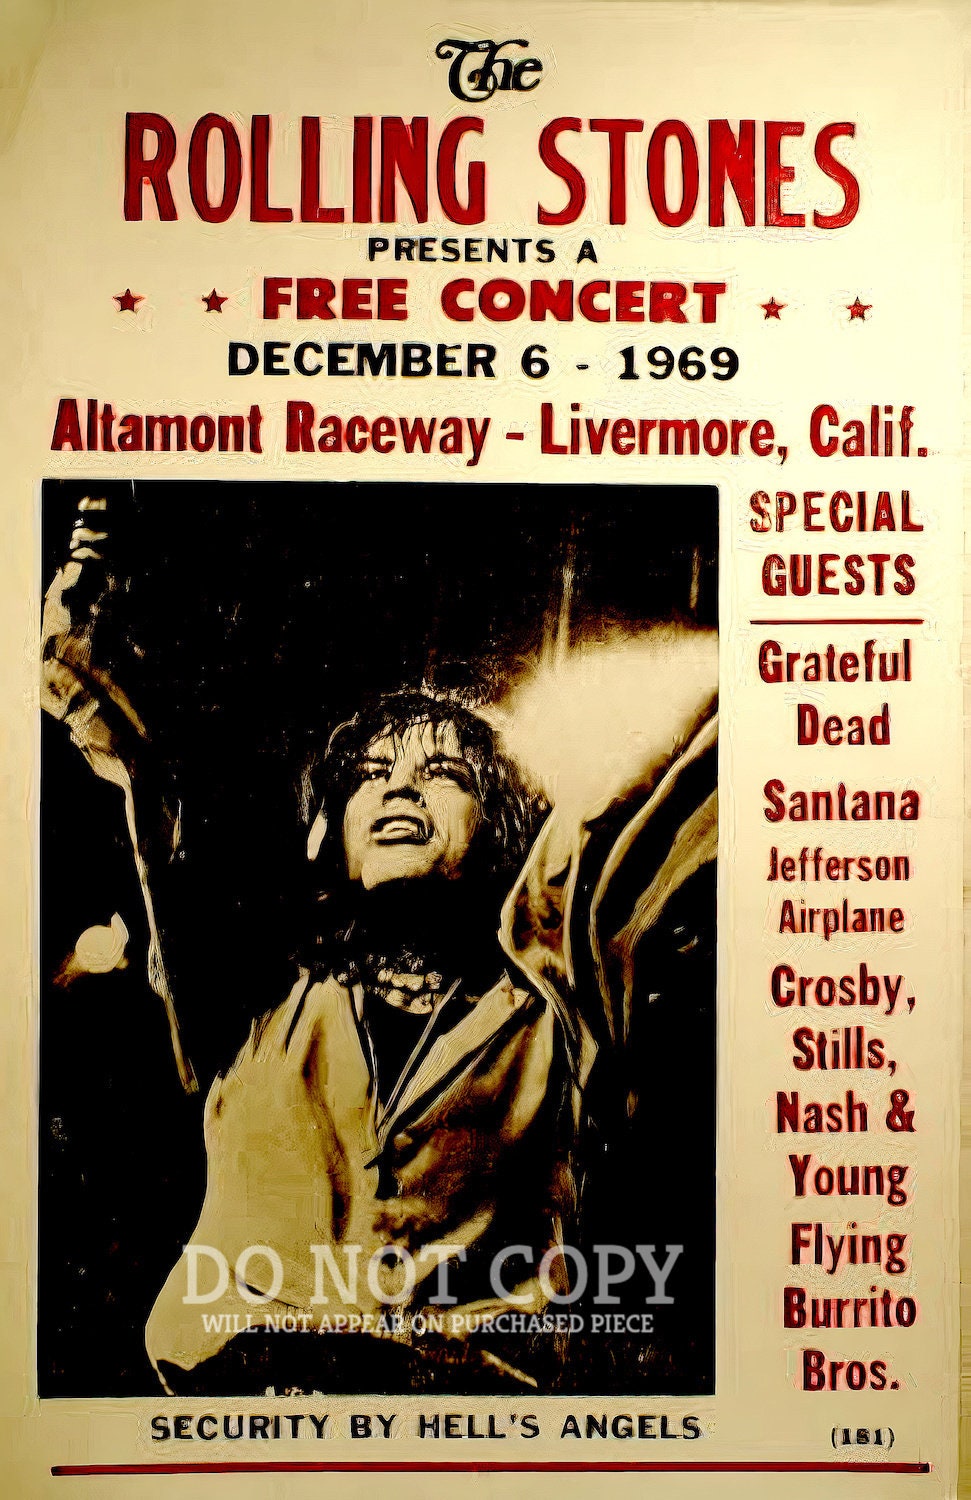 The Stones Altamont Concert Poster 11 X 17 - Legendary 1969 Music Festival - Feat Most Incredible Rock Acts - Rare Marvelous Art Print